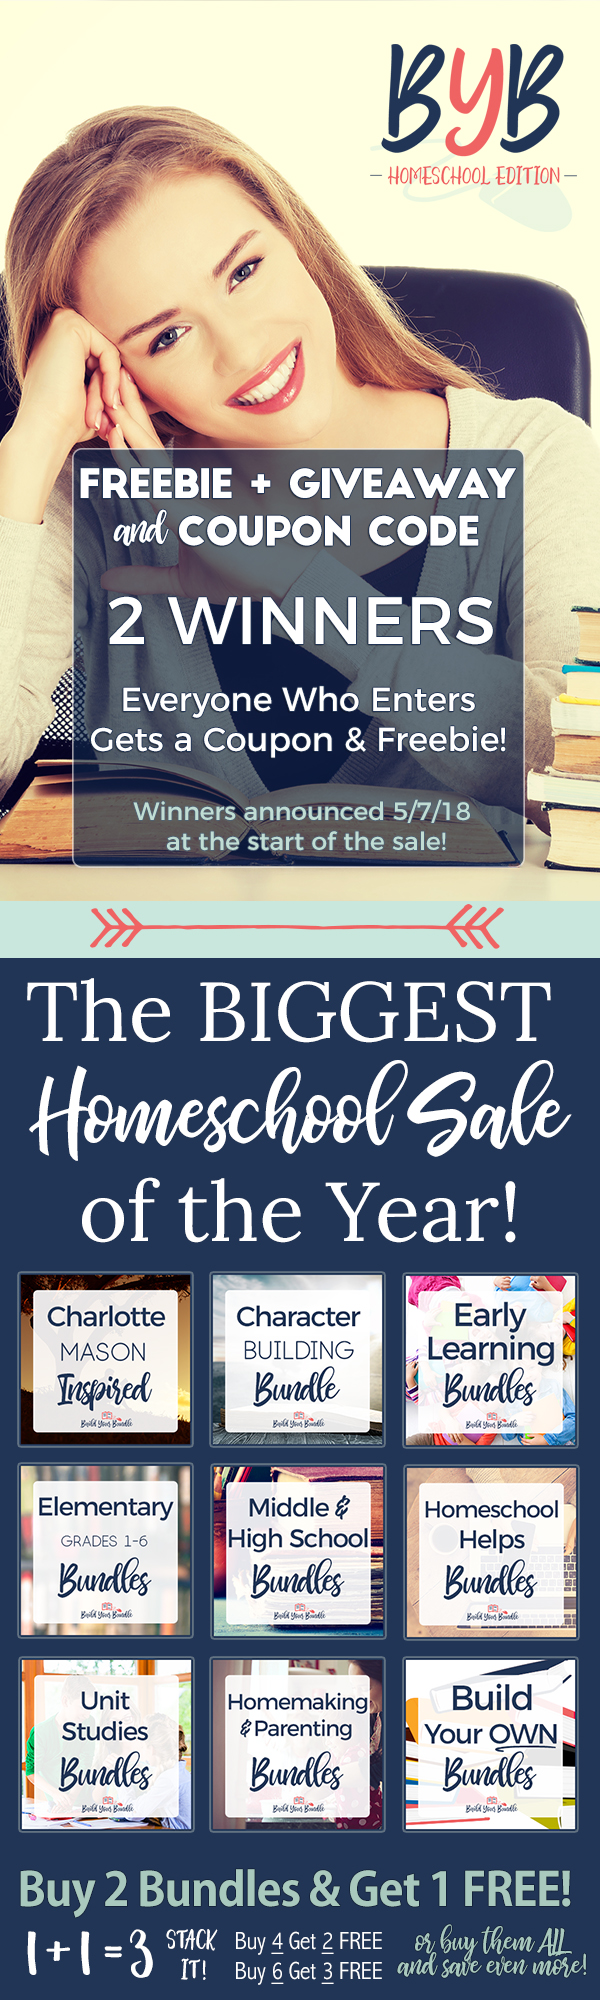 10 Insider Tips for the 2018 Build Your Bundle Homeschool Curriculum Sale